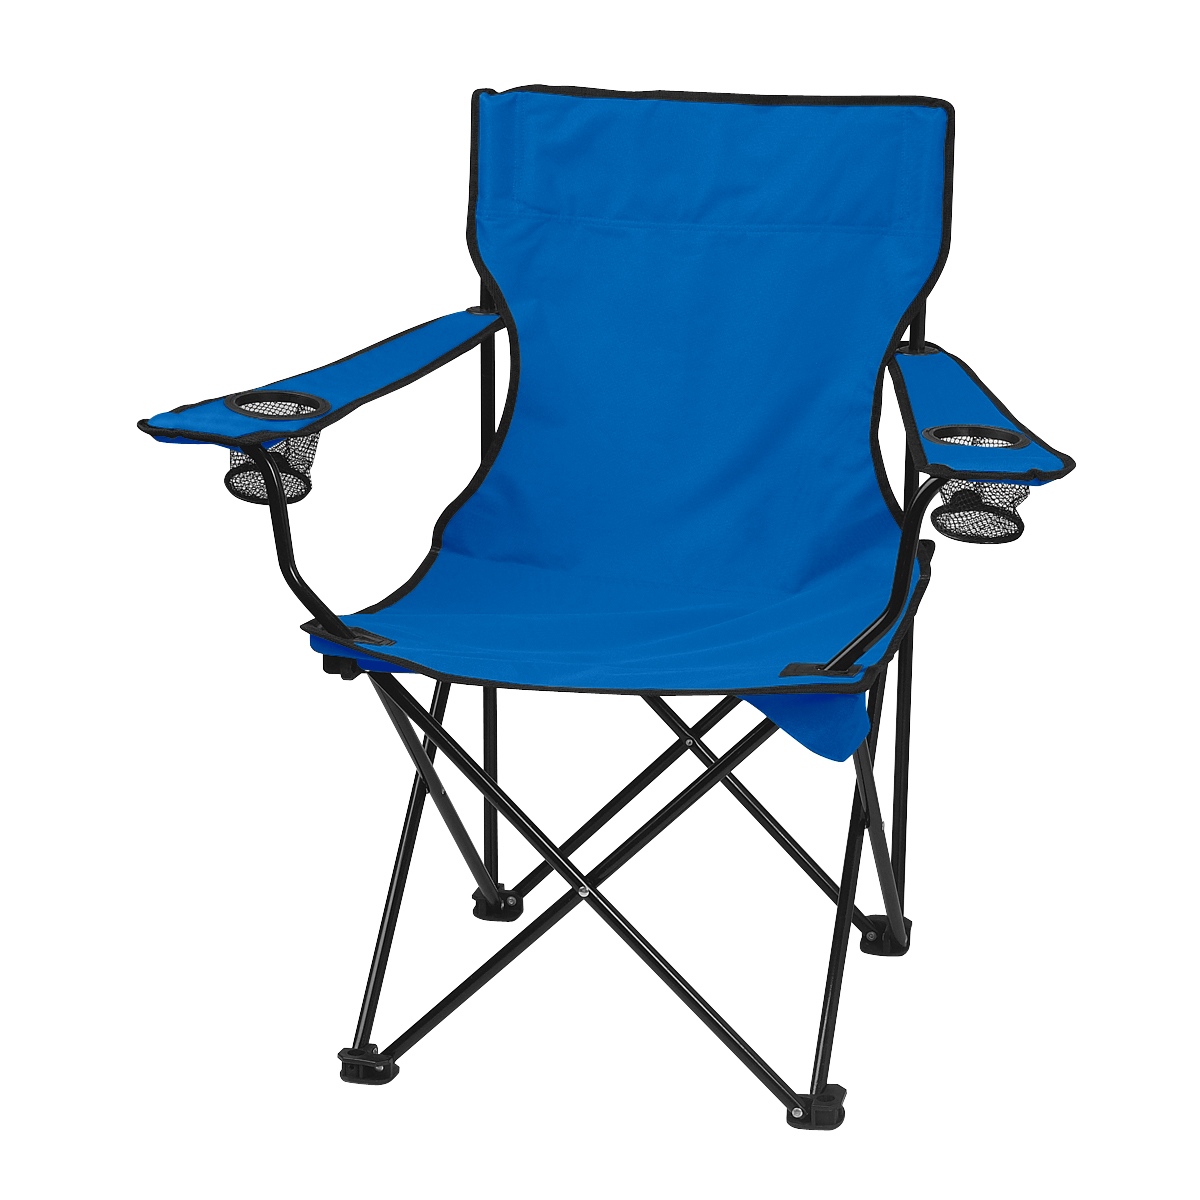 Printed Folding Chair With Carrying Bag | Outdoor - Queensboro